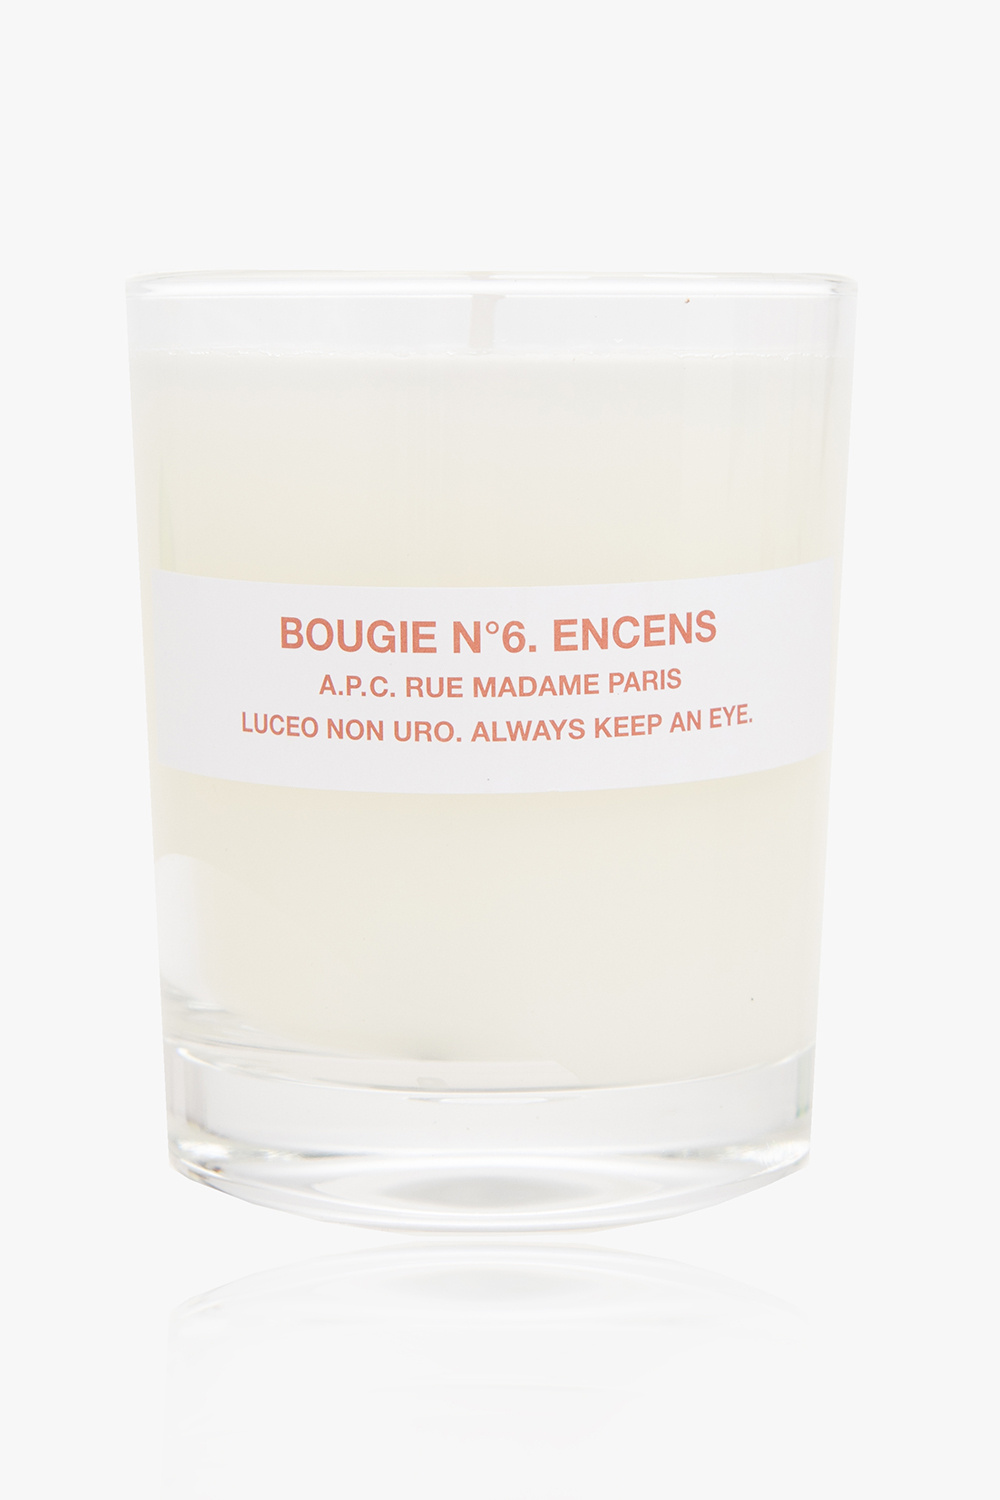 A.P.C. 'Bougie nr 6. Encens’ scented candle